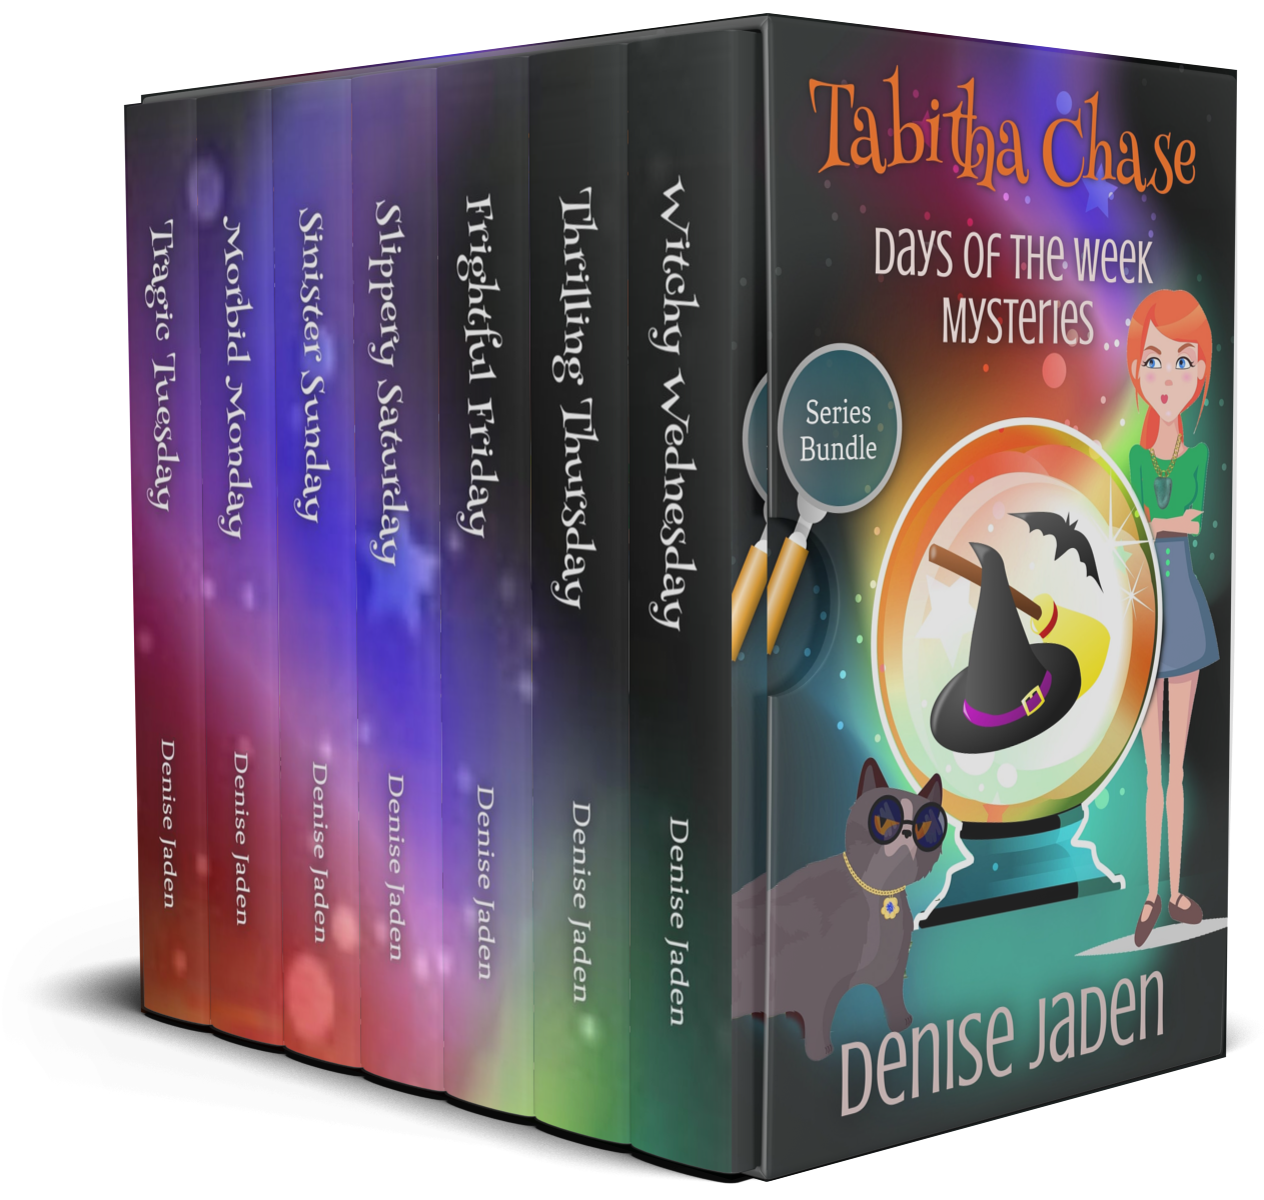 The Ultimate Paranormal Cozy Mystery Series -  Paperbacks - Books 1-7  ⭐⭐⭐⭐⭐ 4.6 (1450 ratings)